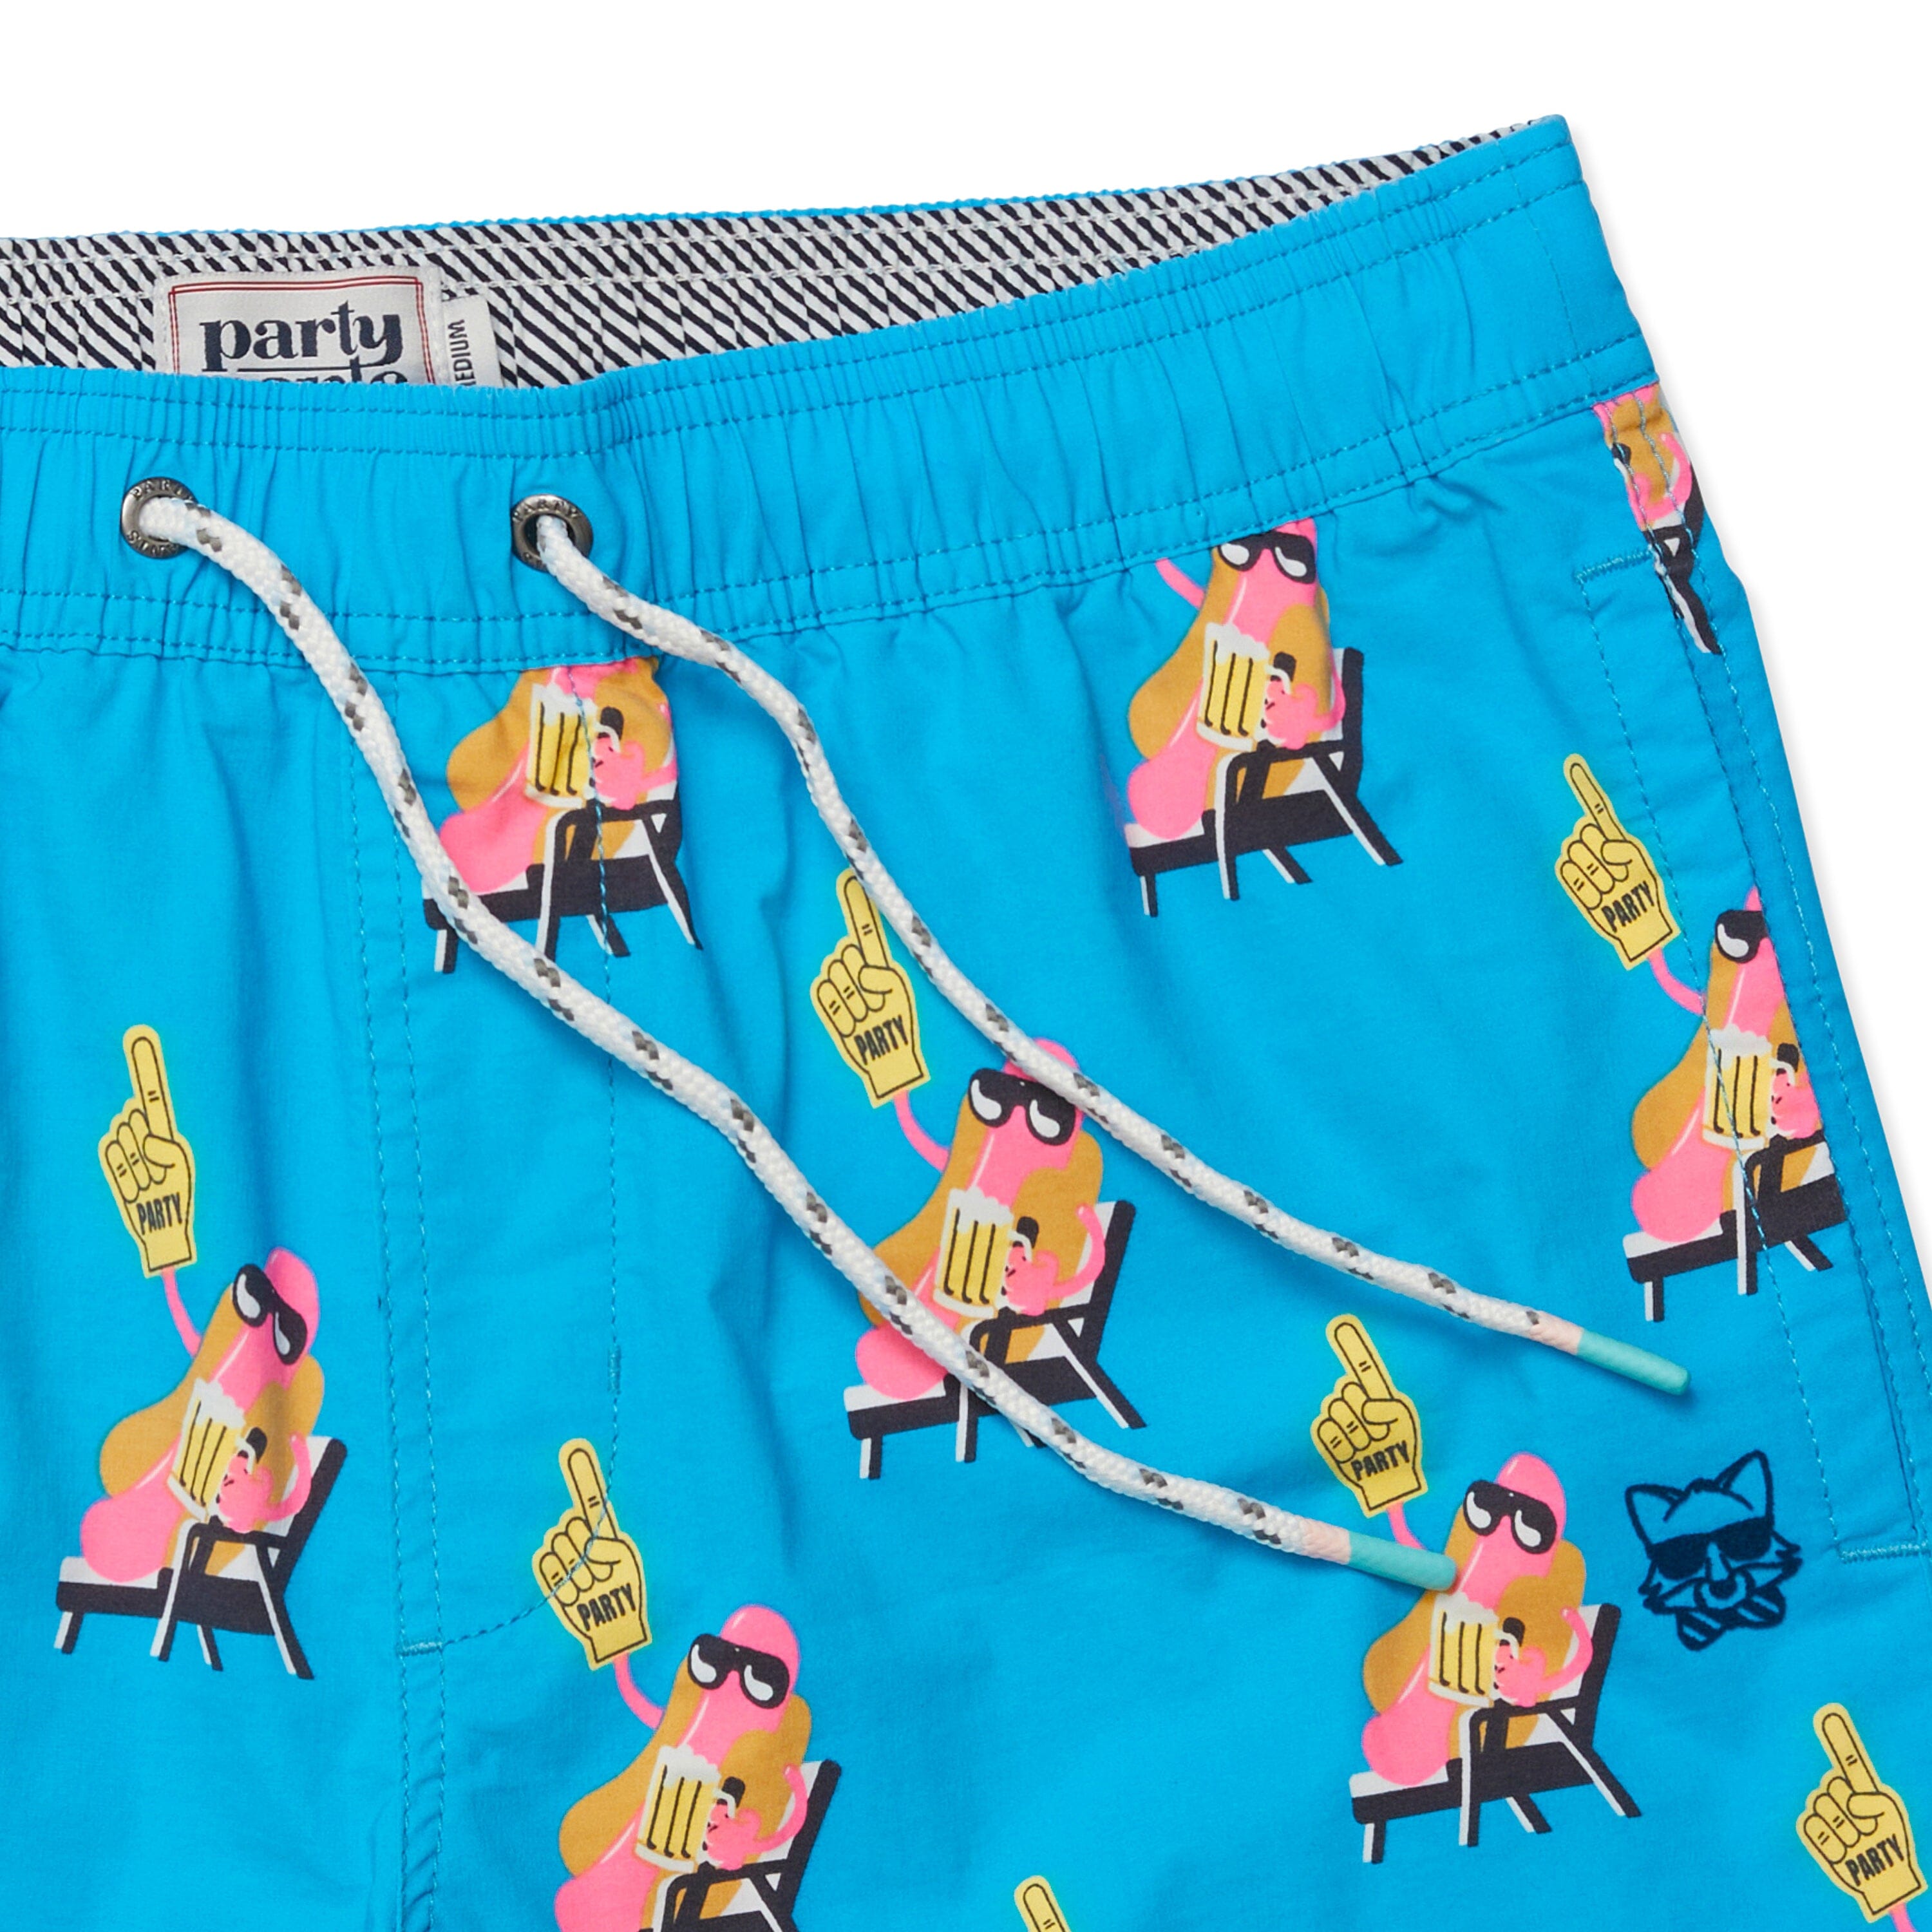 BEER BRAUT PARTY STARTER SHORT - BLUE SALE SHORTS PARTY PANTS 